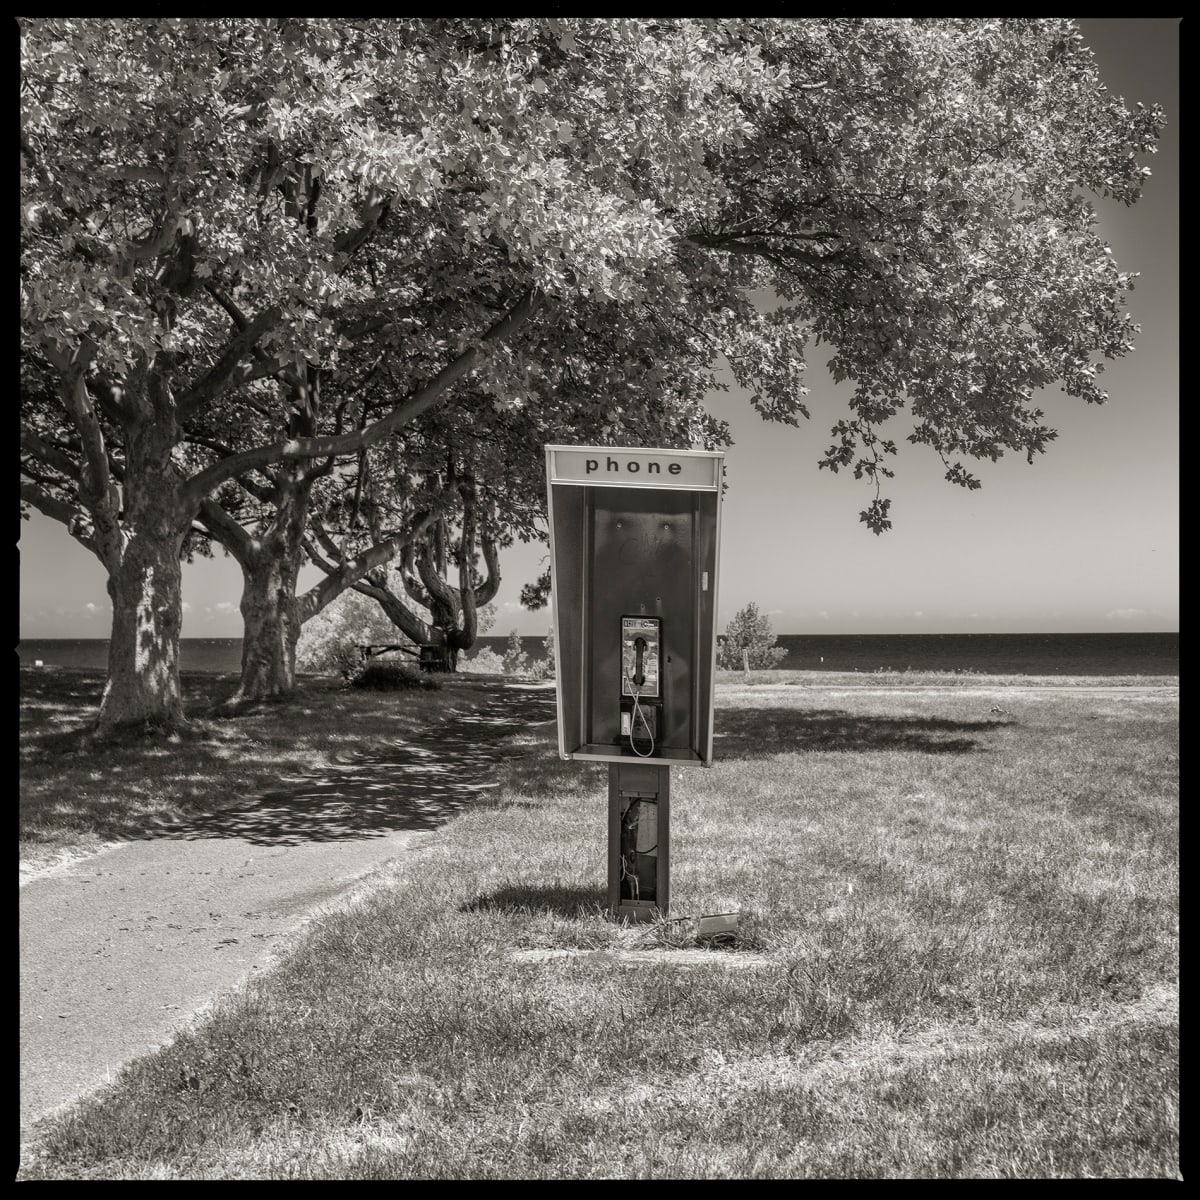 585.964.9801 – Hamlin Beach State Park, 4 Hamlin Beach Road, Hamlin, NY 14464 by Eric T. Kunsman  Image: ID: A black and white image shows a payphone stand in a park.  There are trees lining the left side of the sidewalk, which is to the left of the payphone.  The right side of the payphone is grassy.